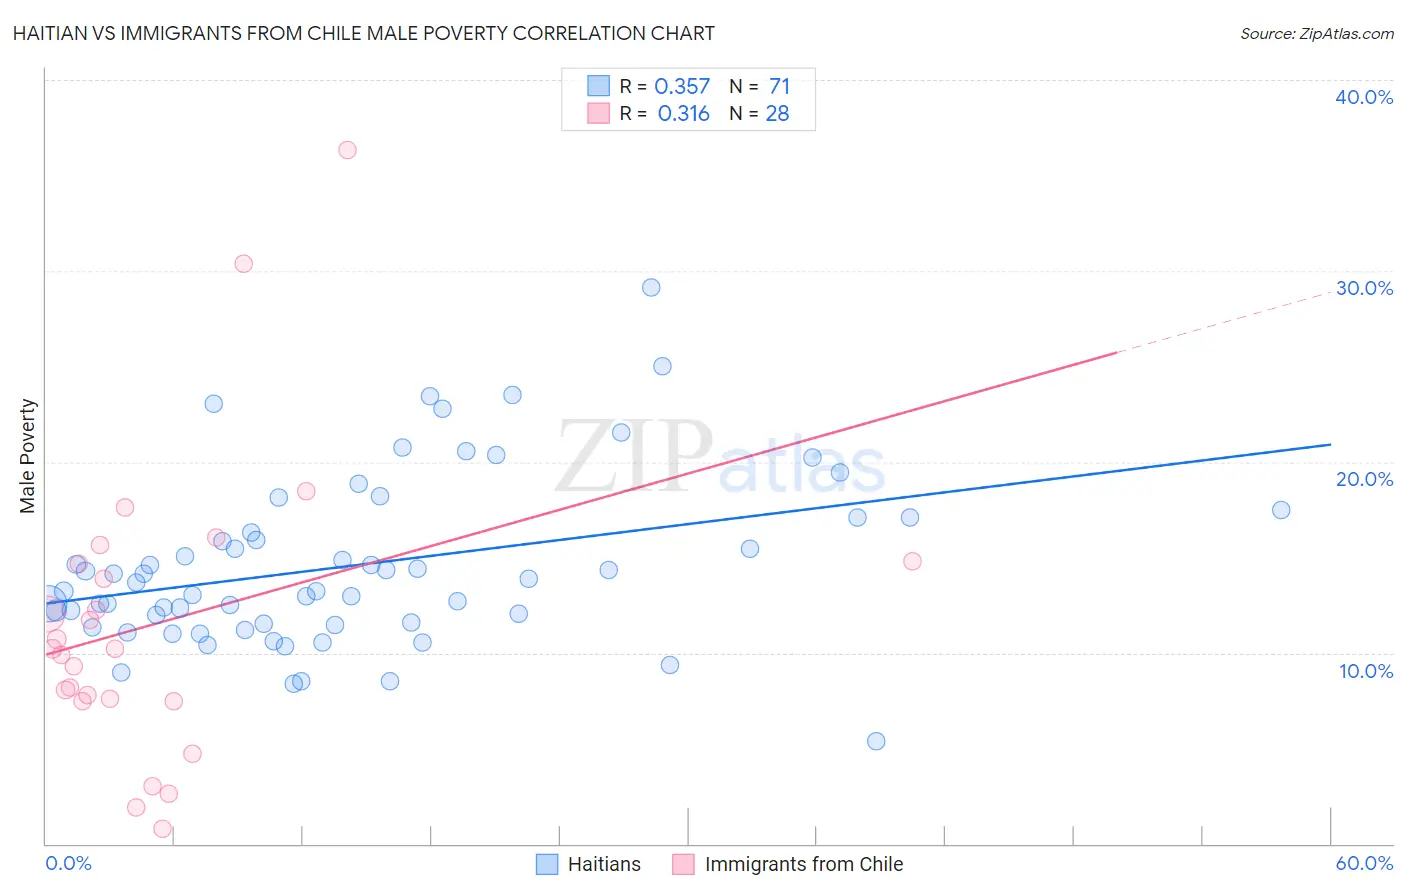 Haitian vs Immigrants from Chile Male Poverty